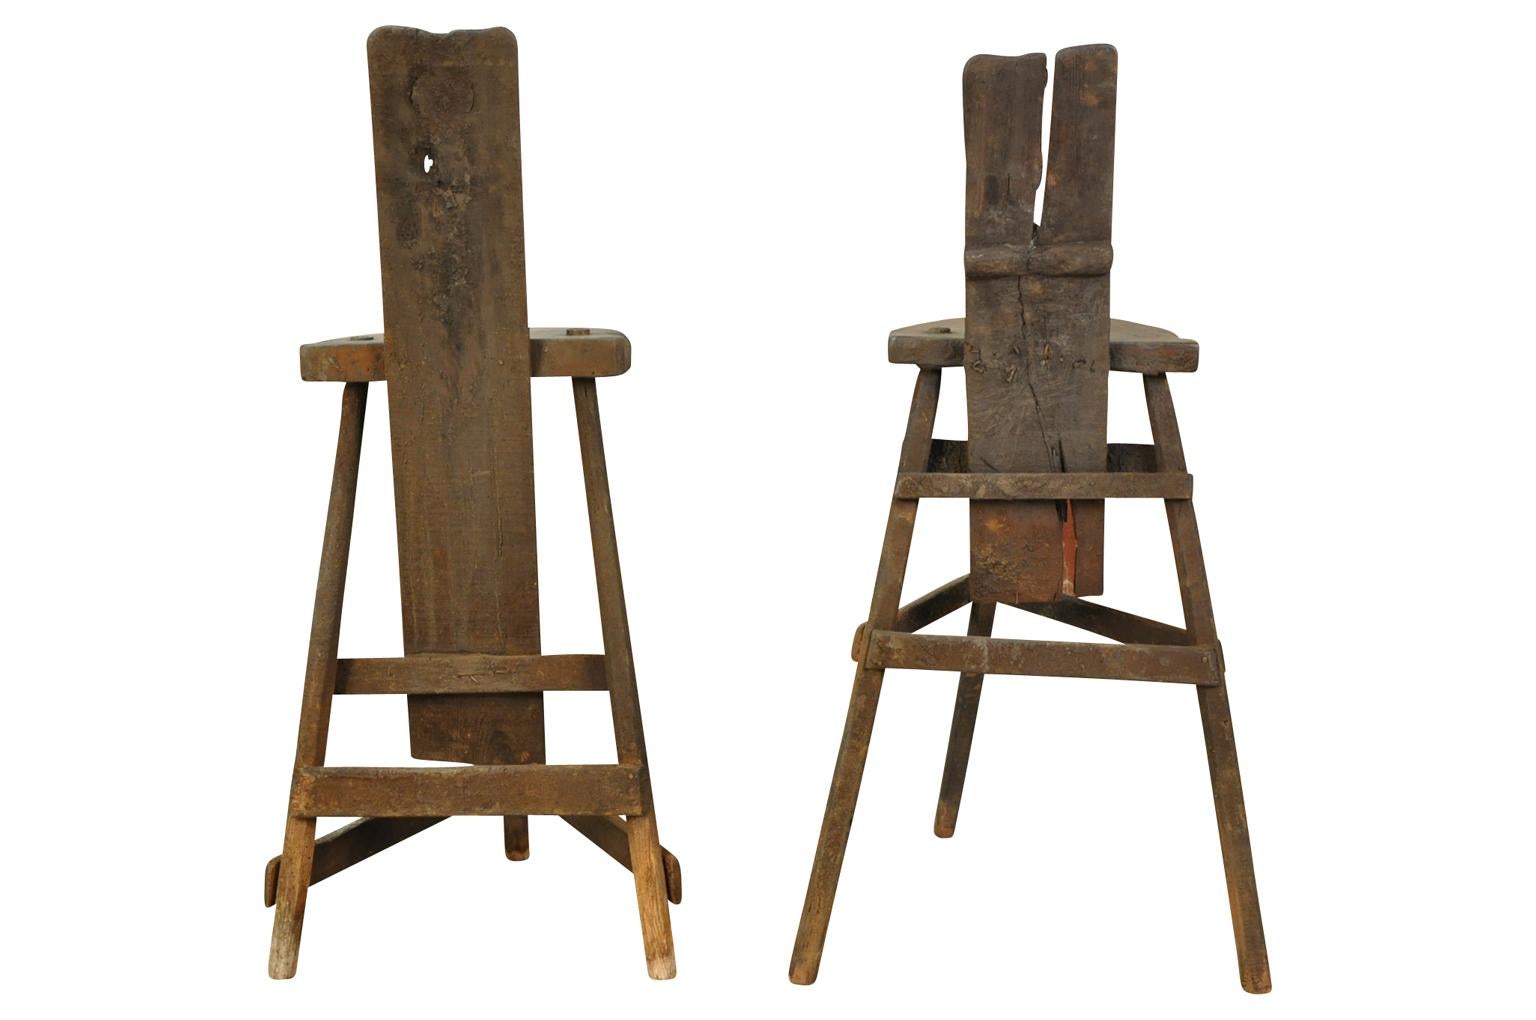 French Very Rare Pair of Coultoulier, Knife Maker's Chairs